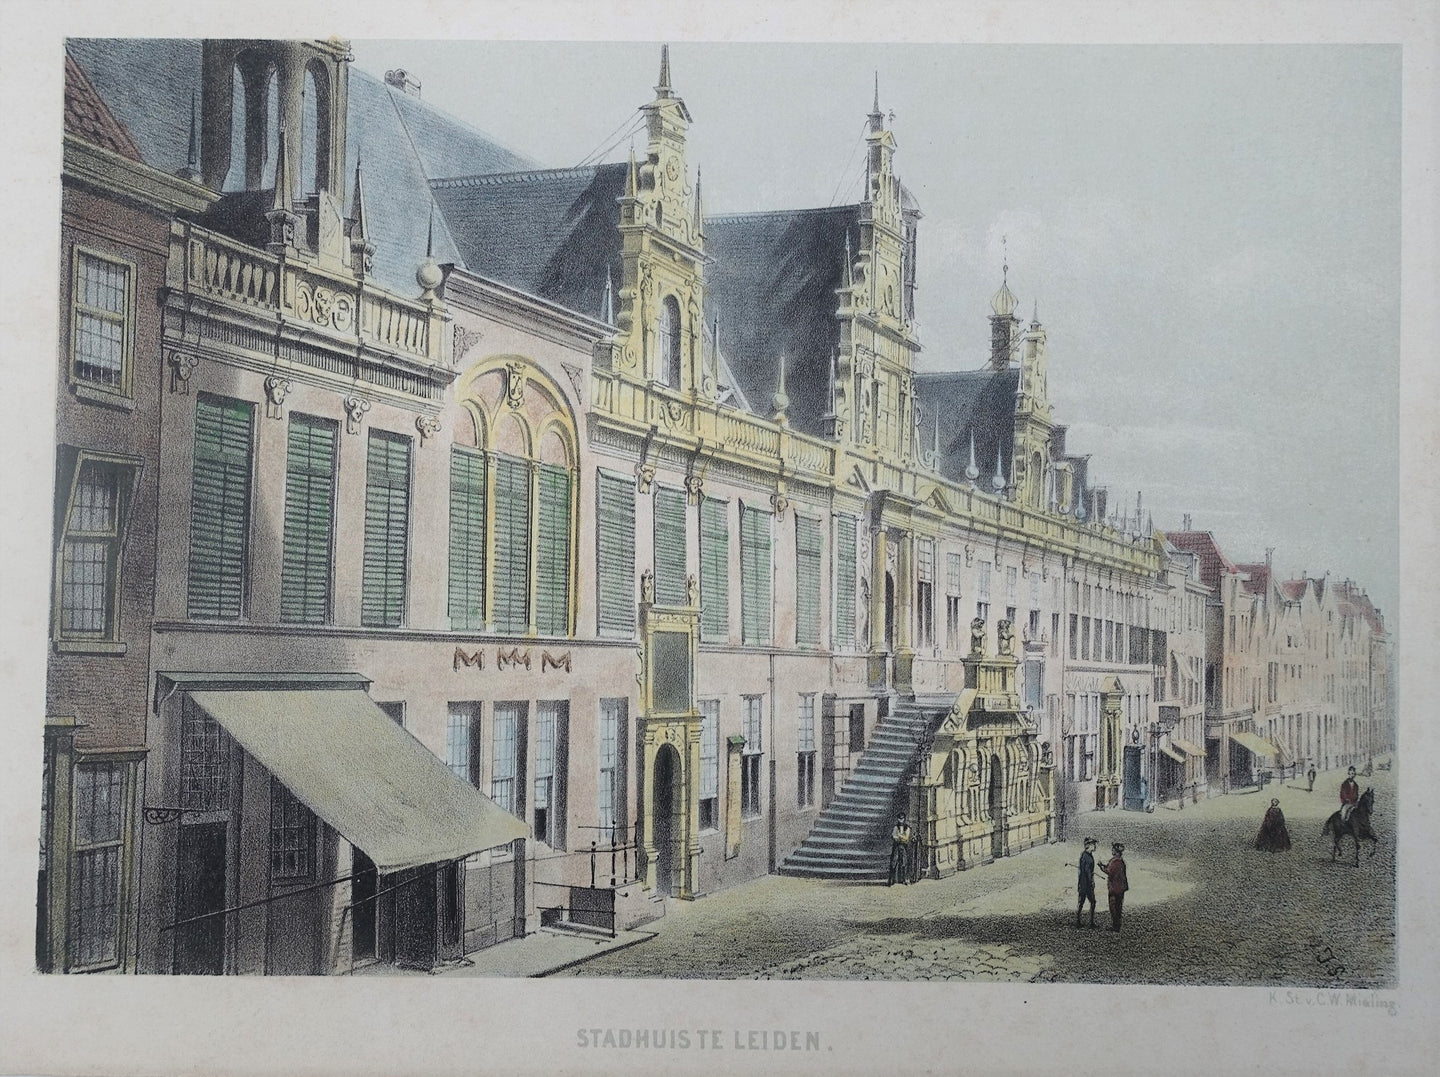 Leiden Stadhuis - CW Mieling - 1863